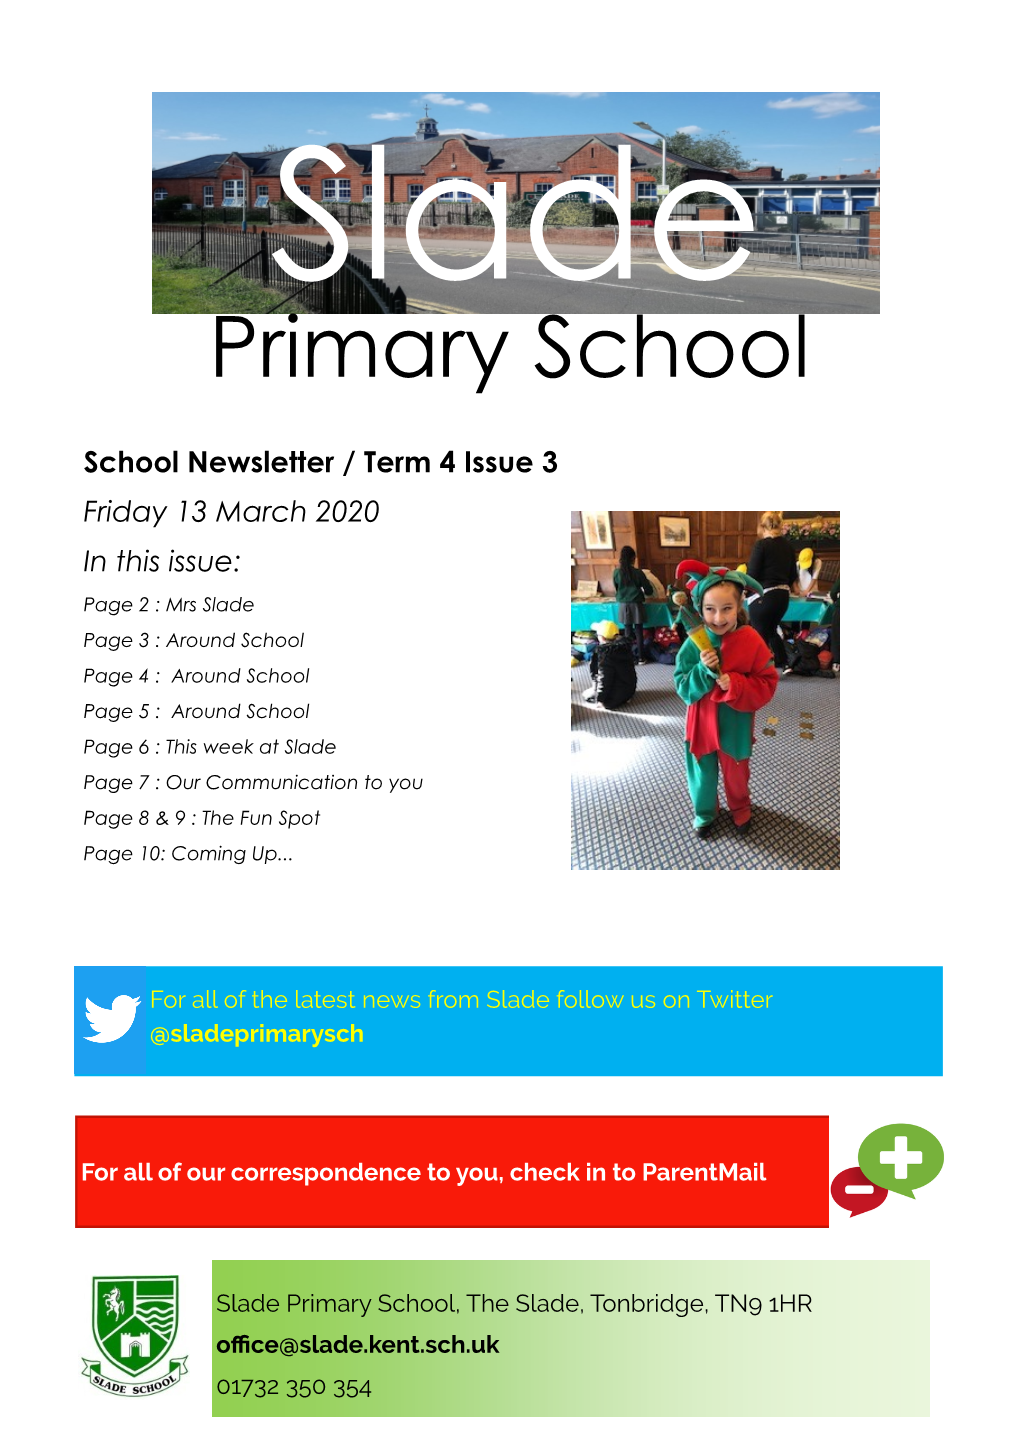 School Newsletter / Term 4 Issue 3 Friday 13 March 2020 in This Issue